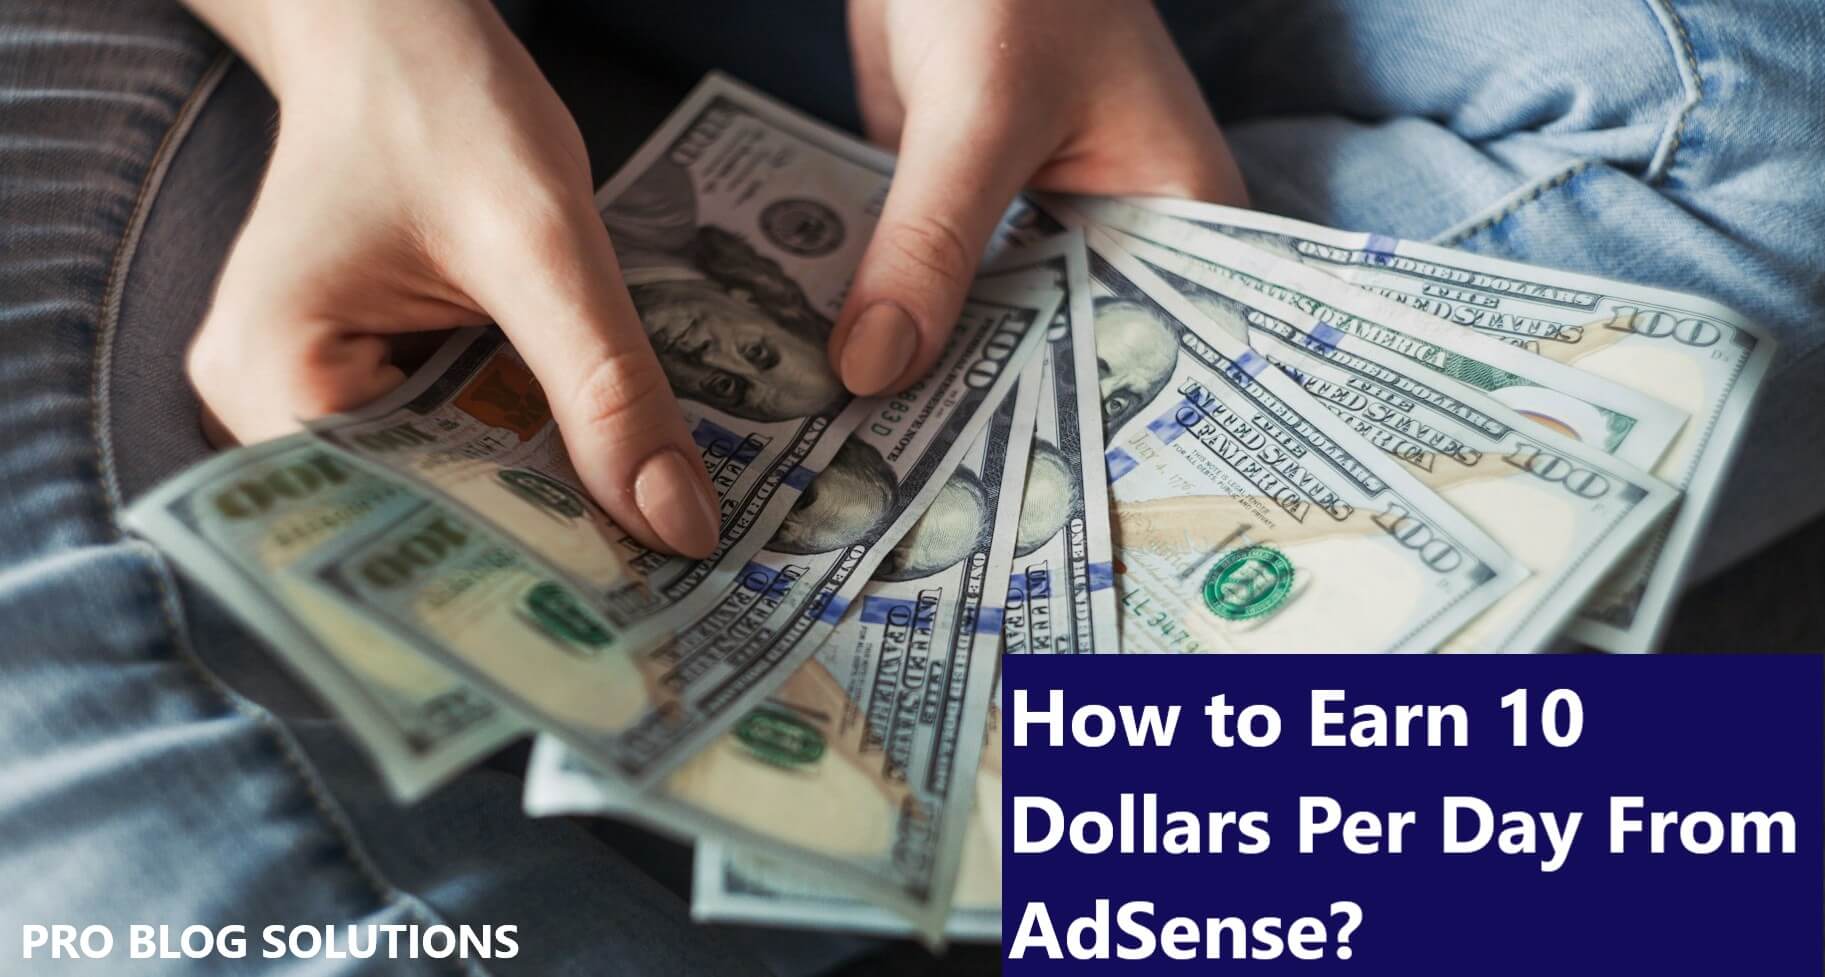 How to Earn 10 Dollars Per Day From AdSense